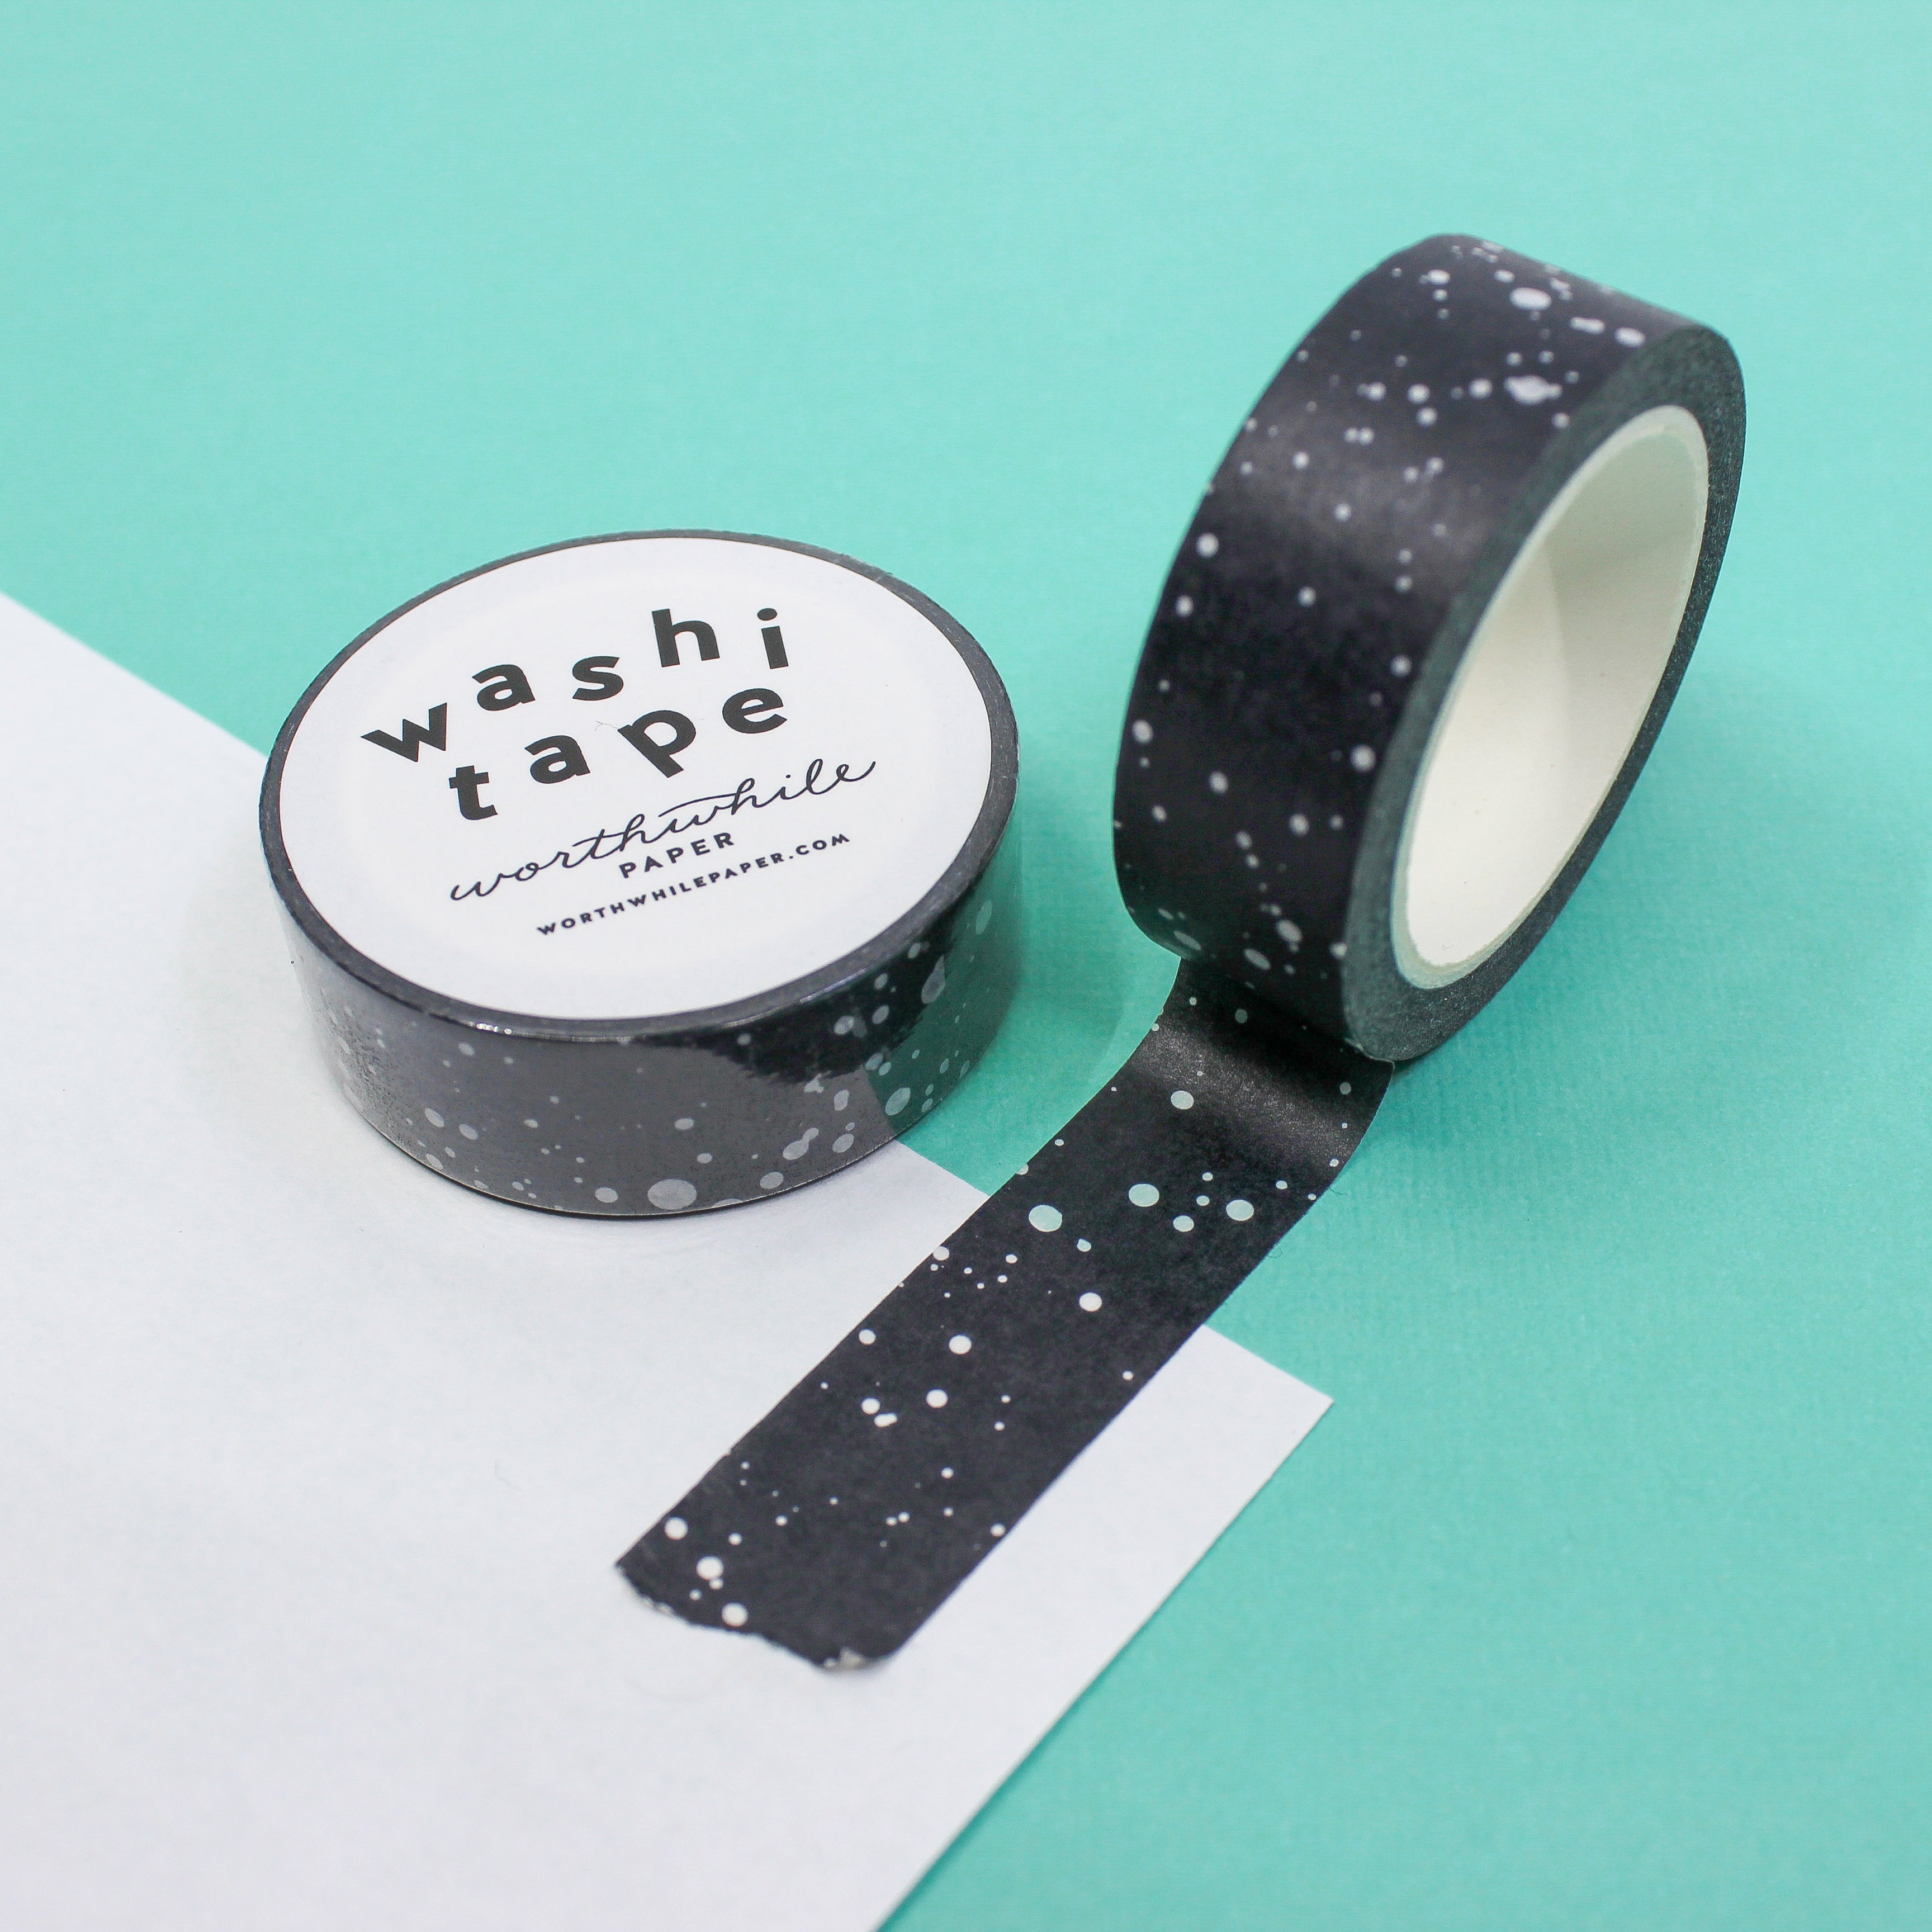 This photo is of a modern and fun black and white paint splatter washi tape from worthwhile paper and sold at BBB Supplies craft and journaling shop.